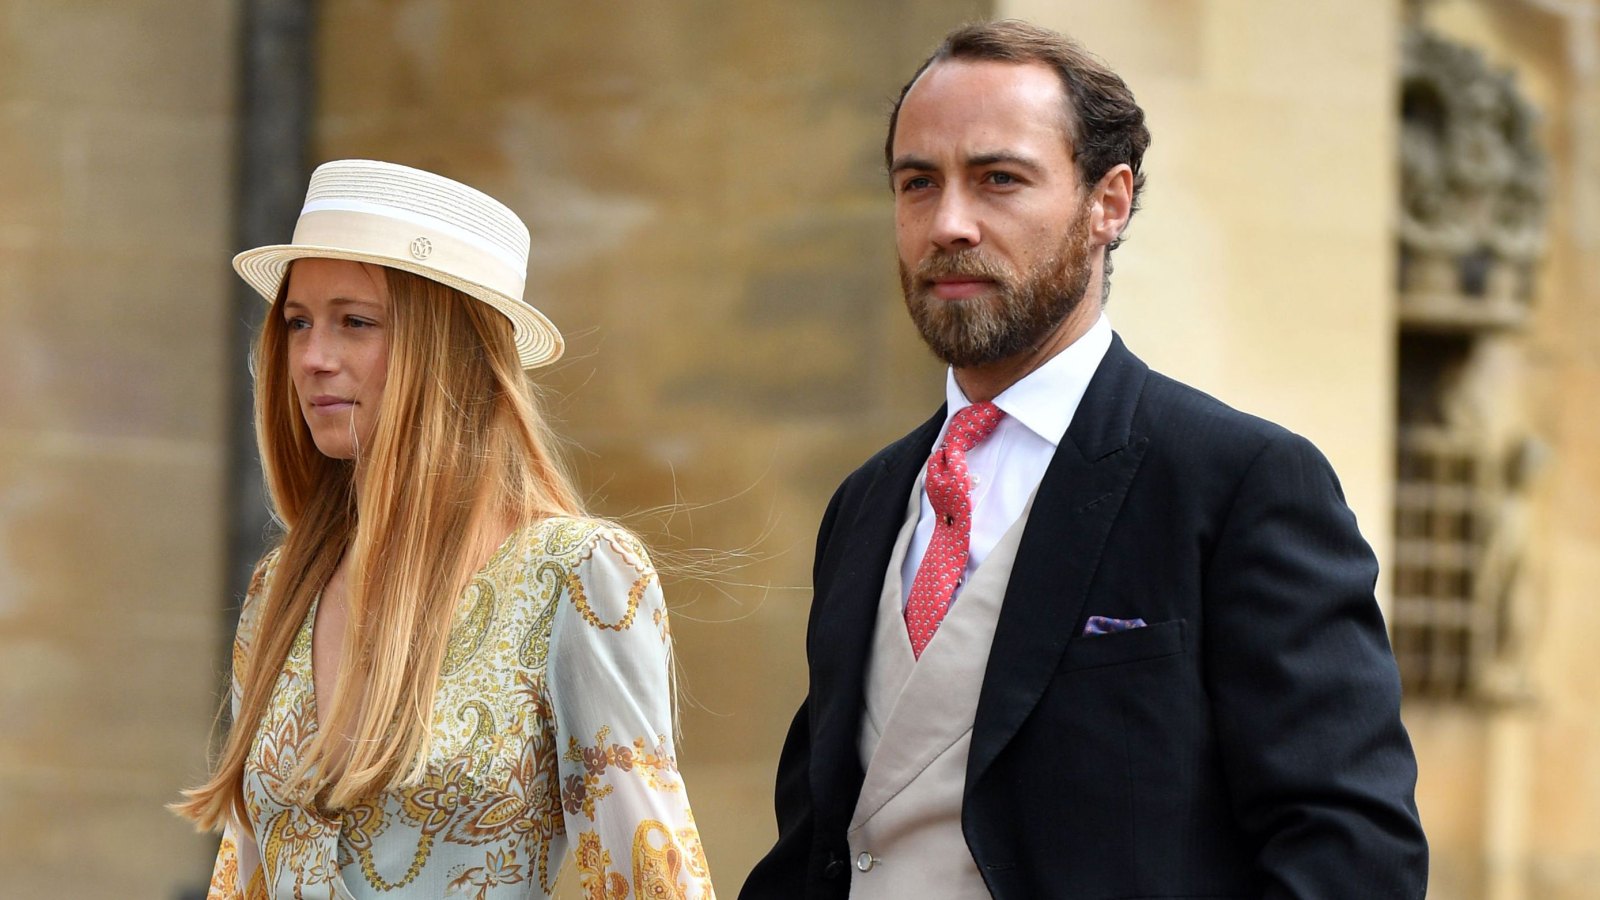 James Middleton Is Reportedly Engaged to Girlfriend Alizee Thevenet